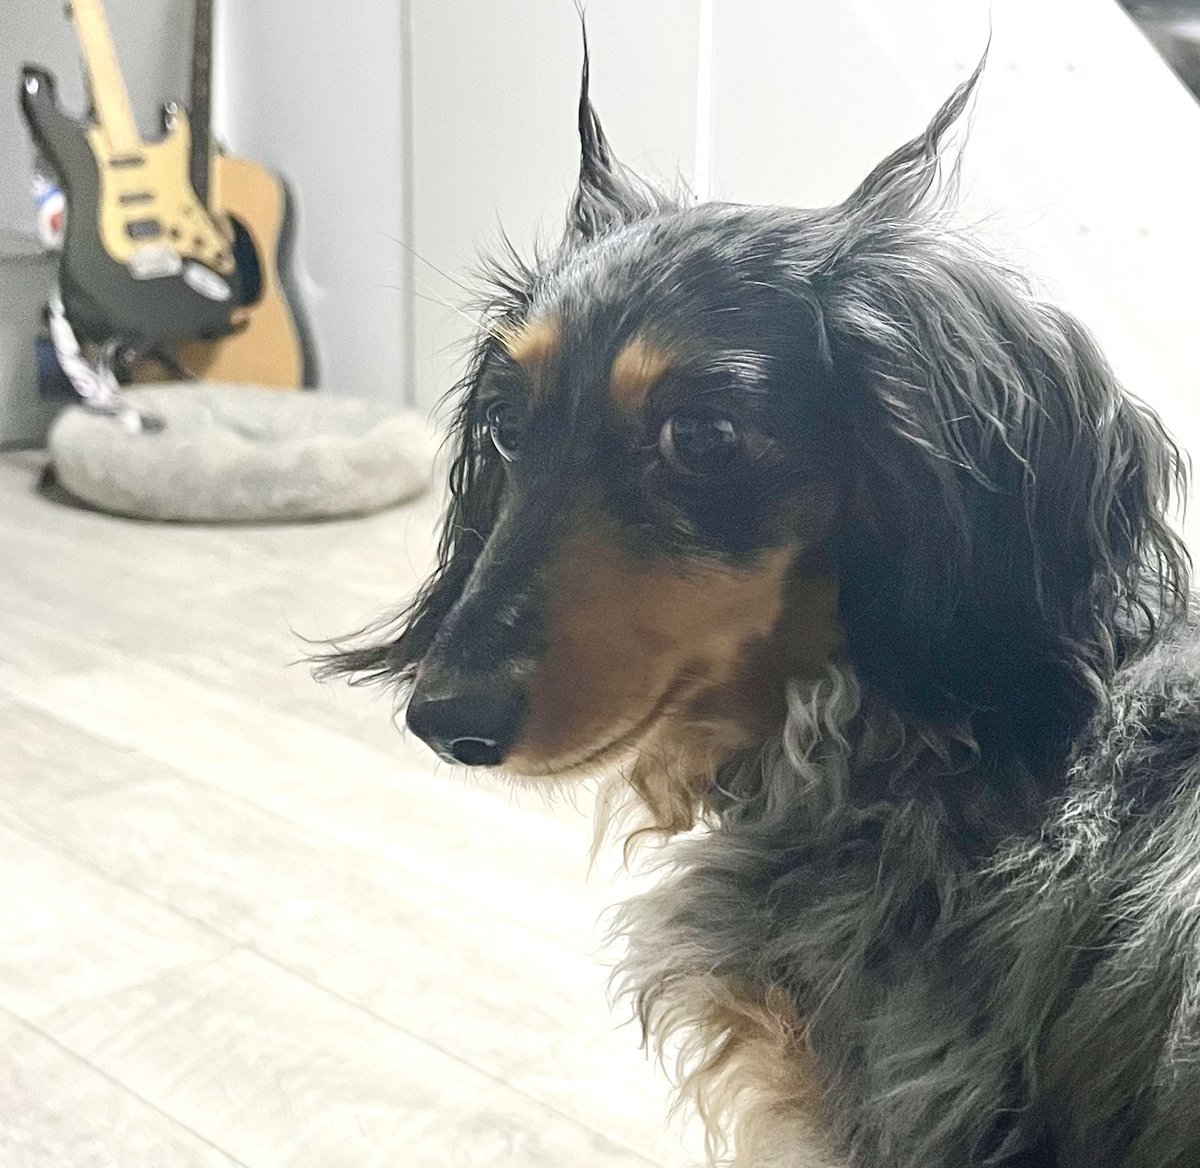 Mama says … this sums up #crazytits … apparently Elvis sang about her 🥰🥰🥰 #devilindisguise #funny #sausagearmy #londonlowriders